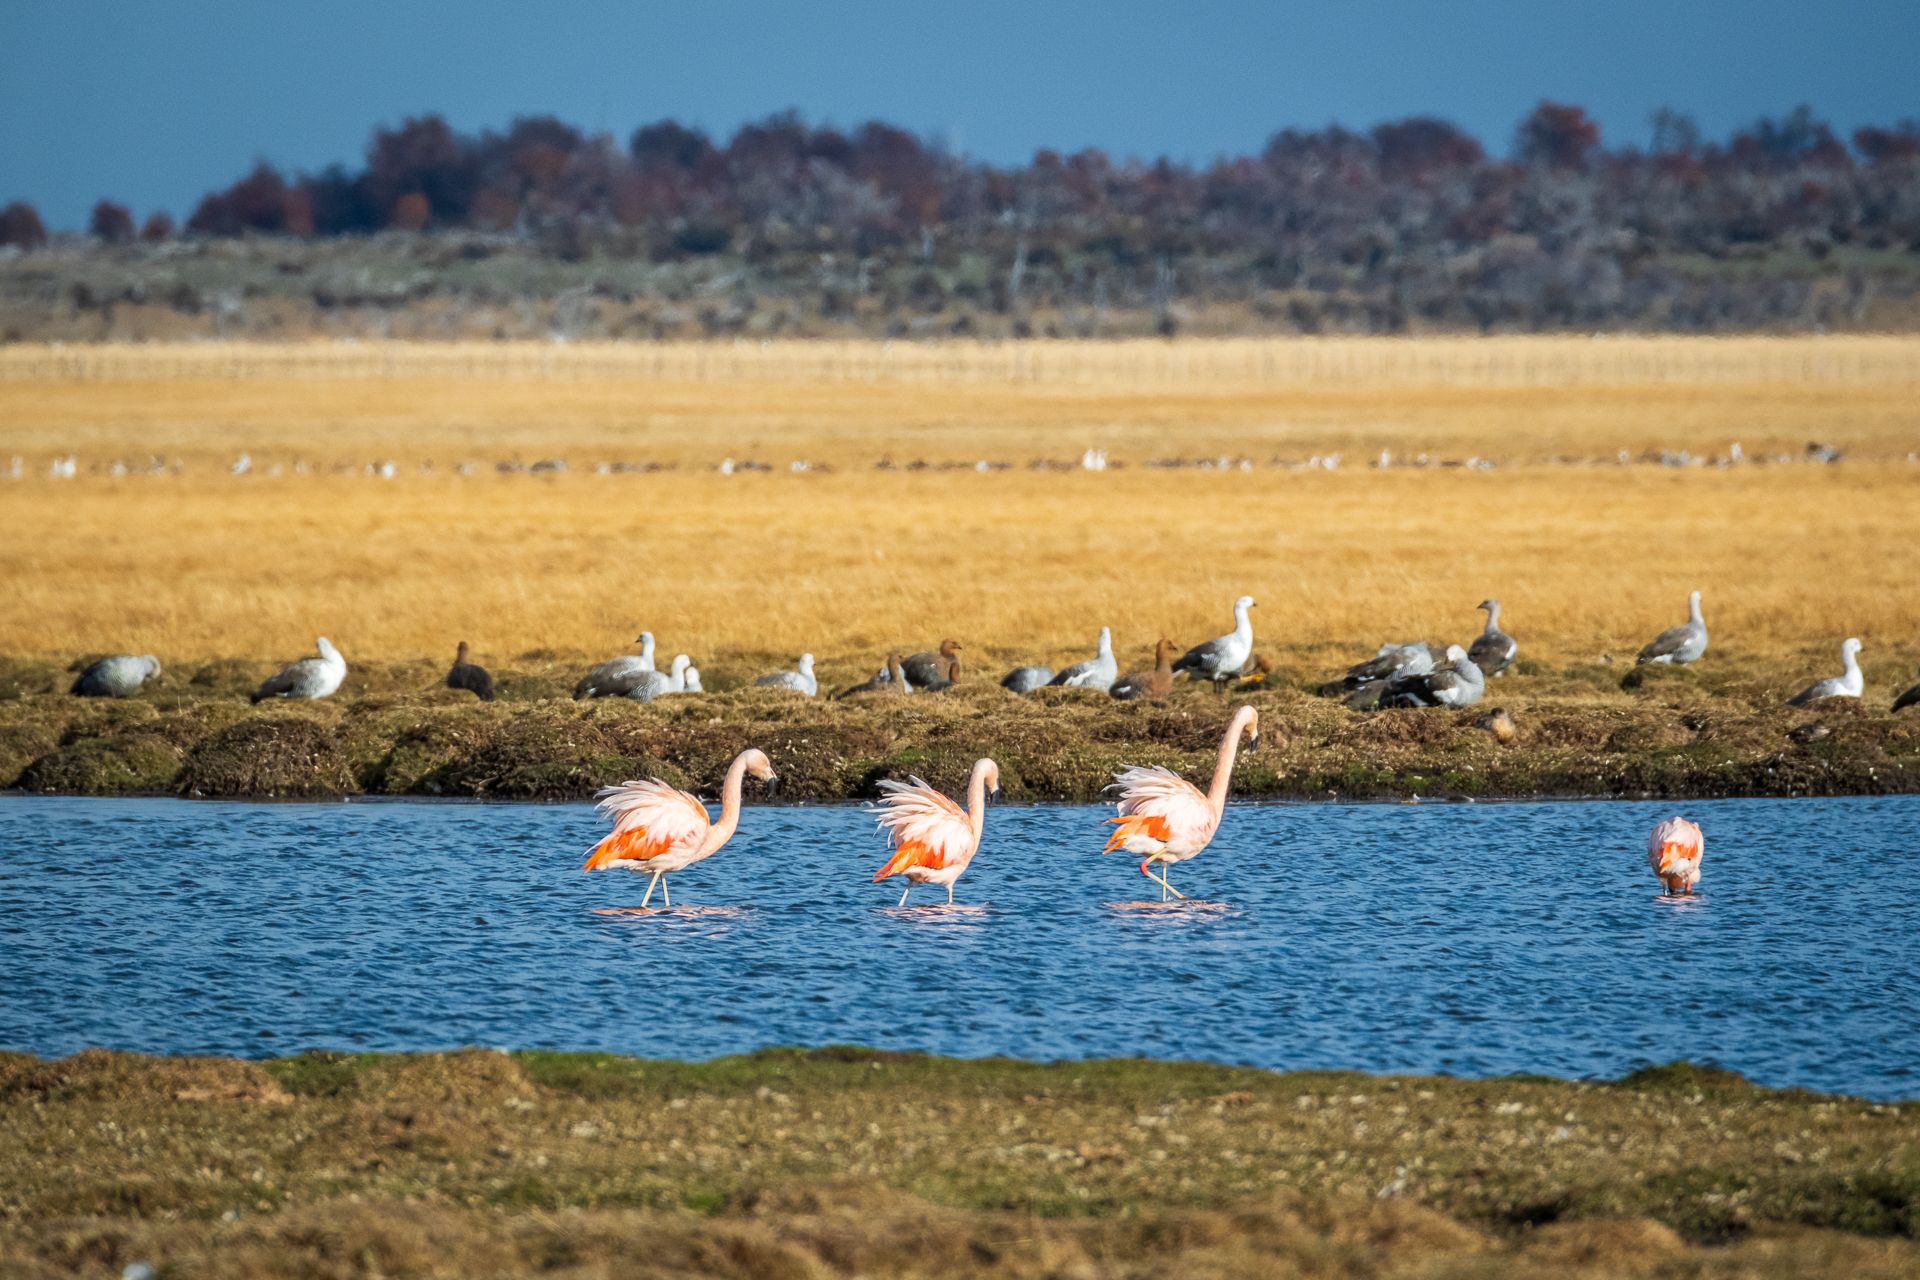 Flamingos and geese at a lagoon in Patagonia.